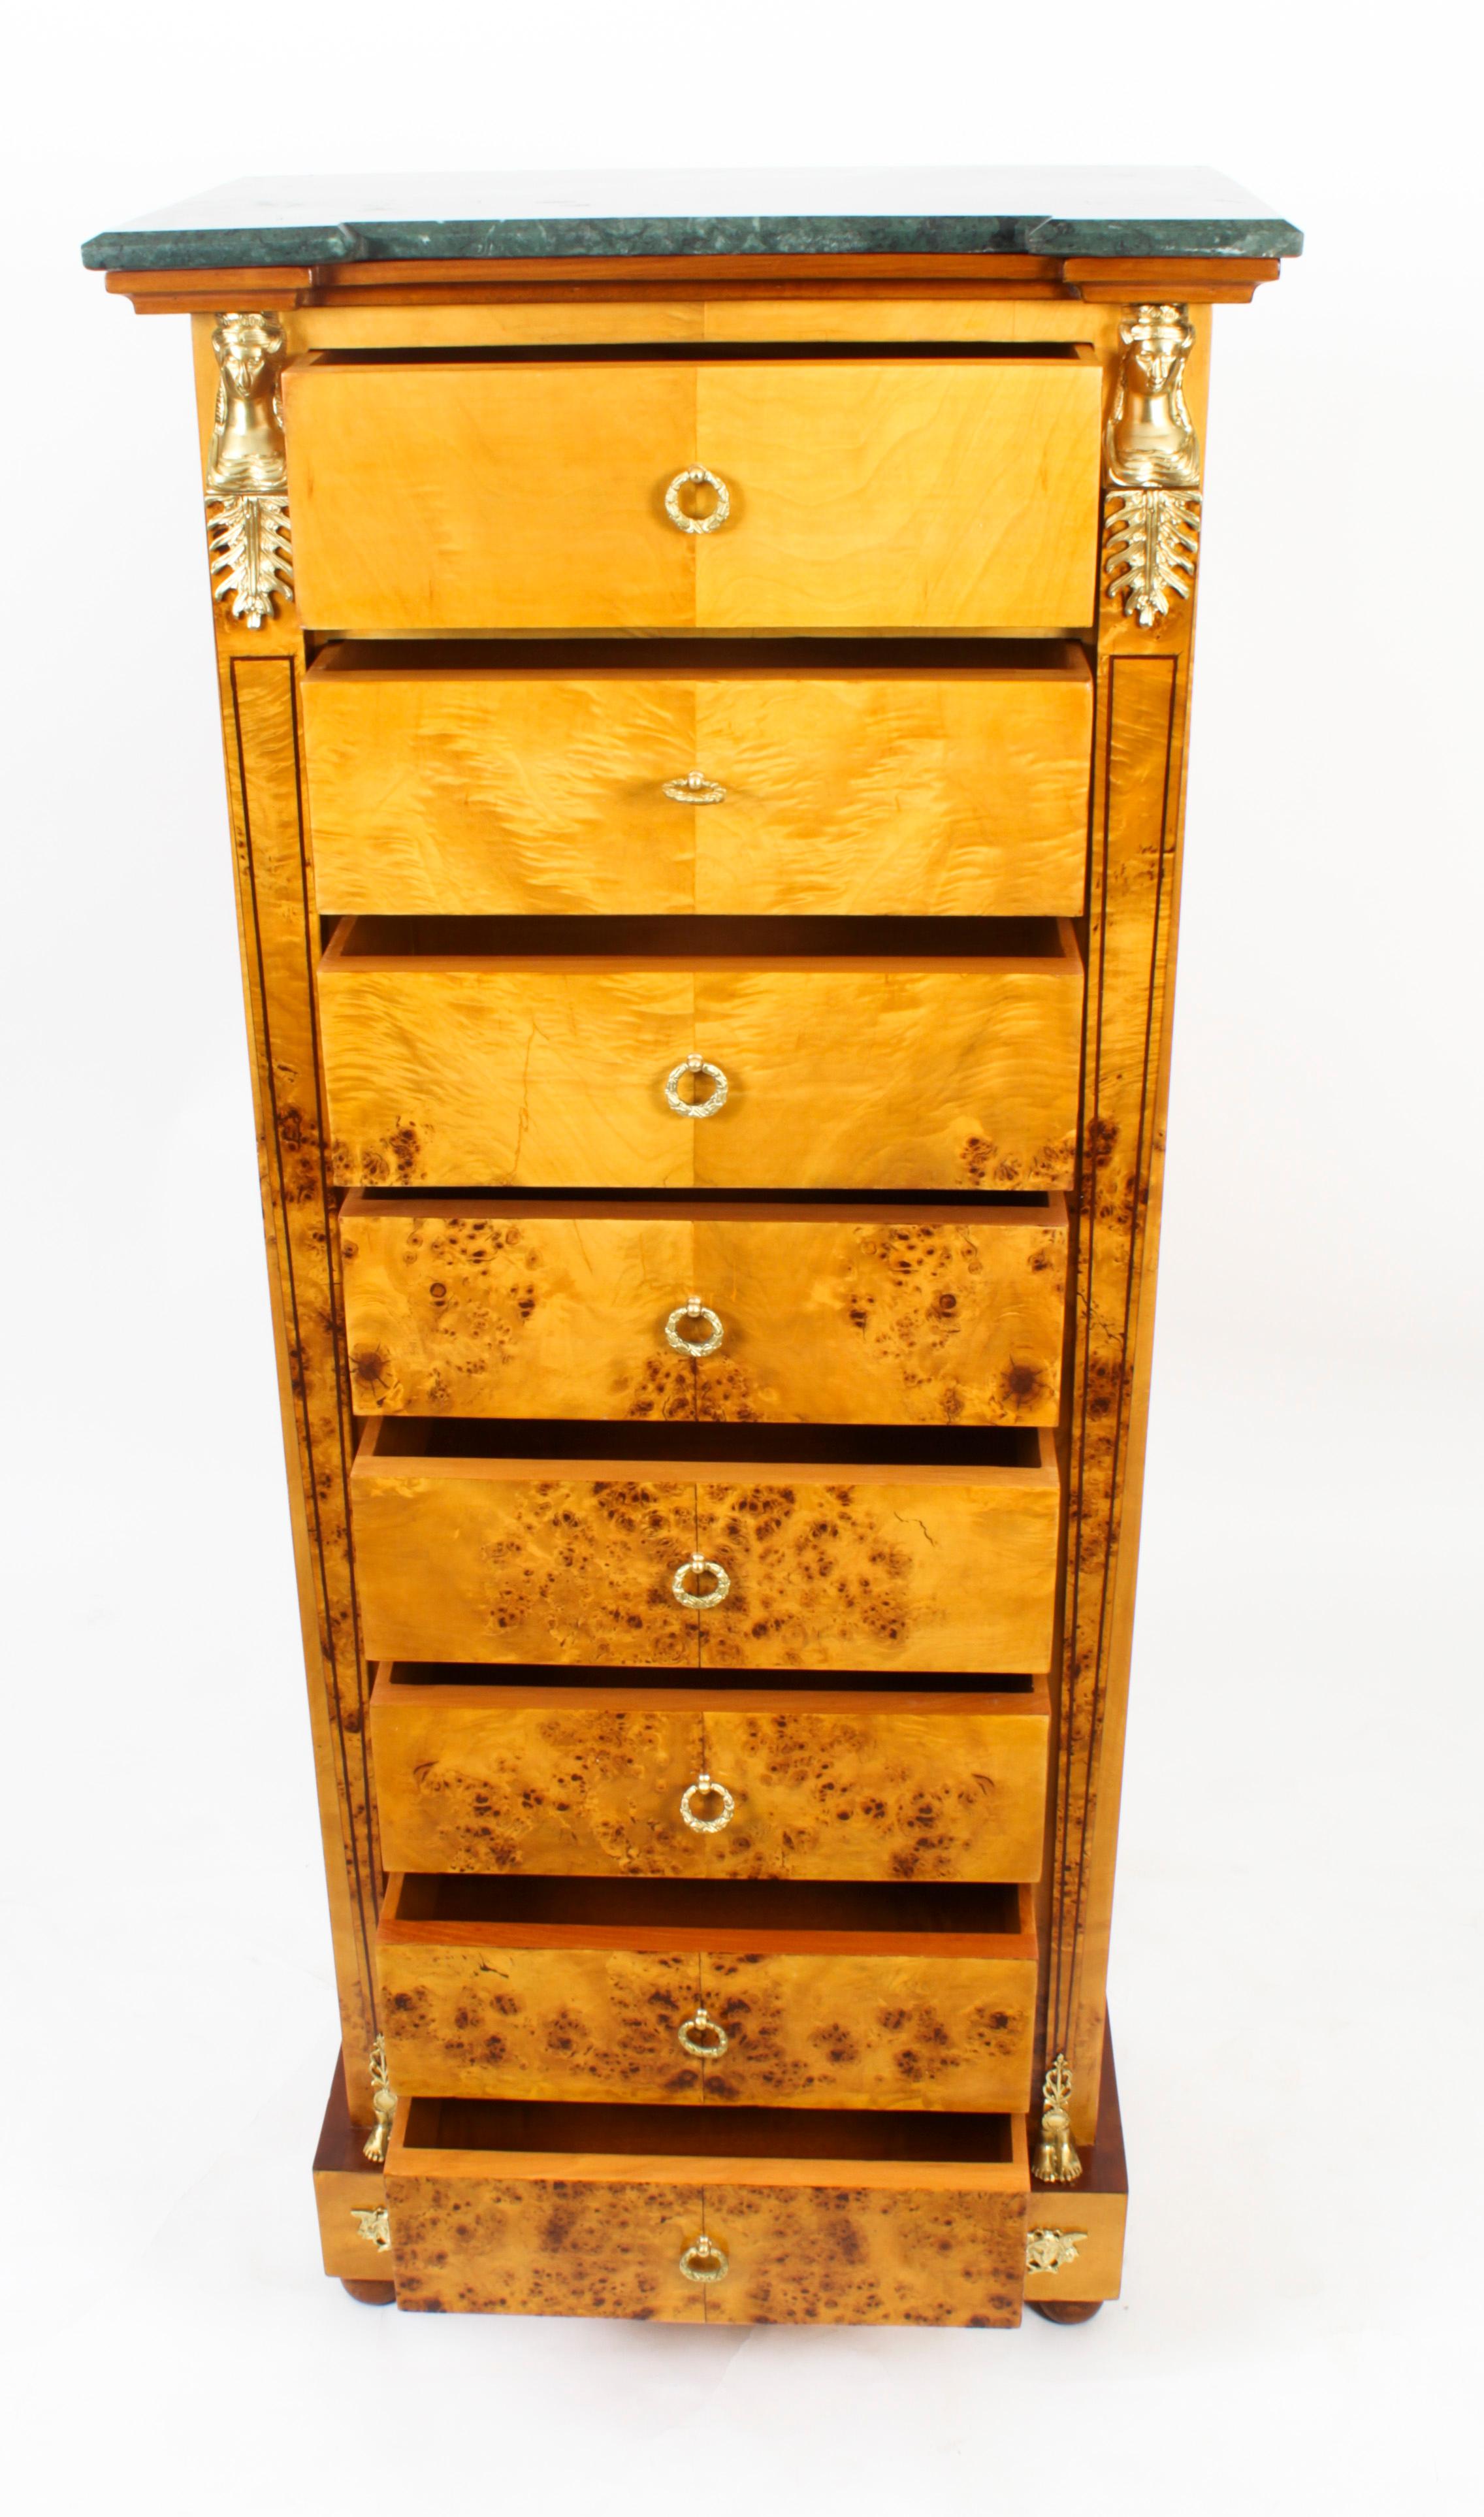 Vintage Empire Revival Burr Maple Tall Chest 20th C For Sale 11